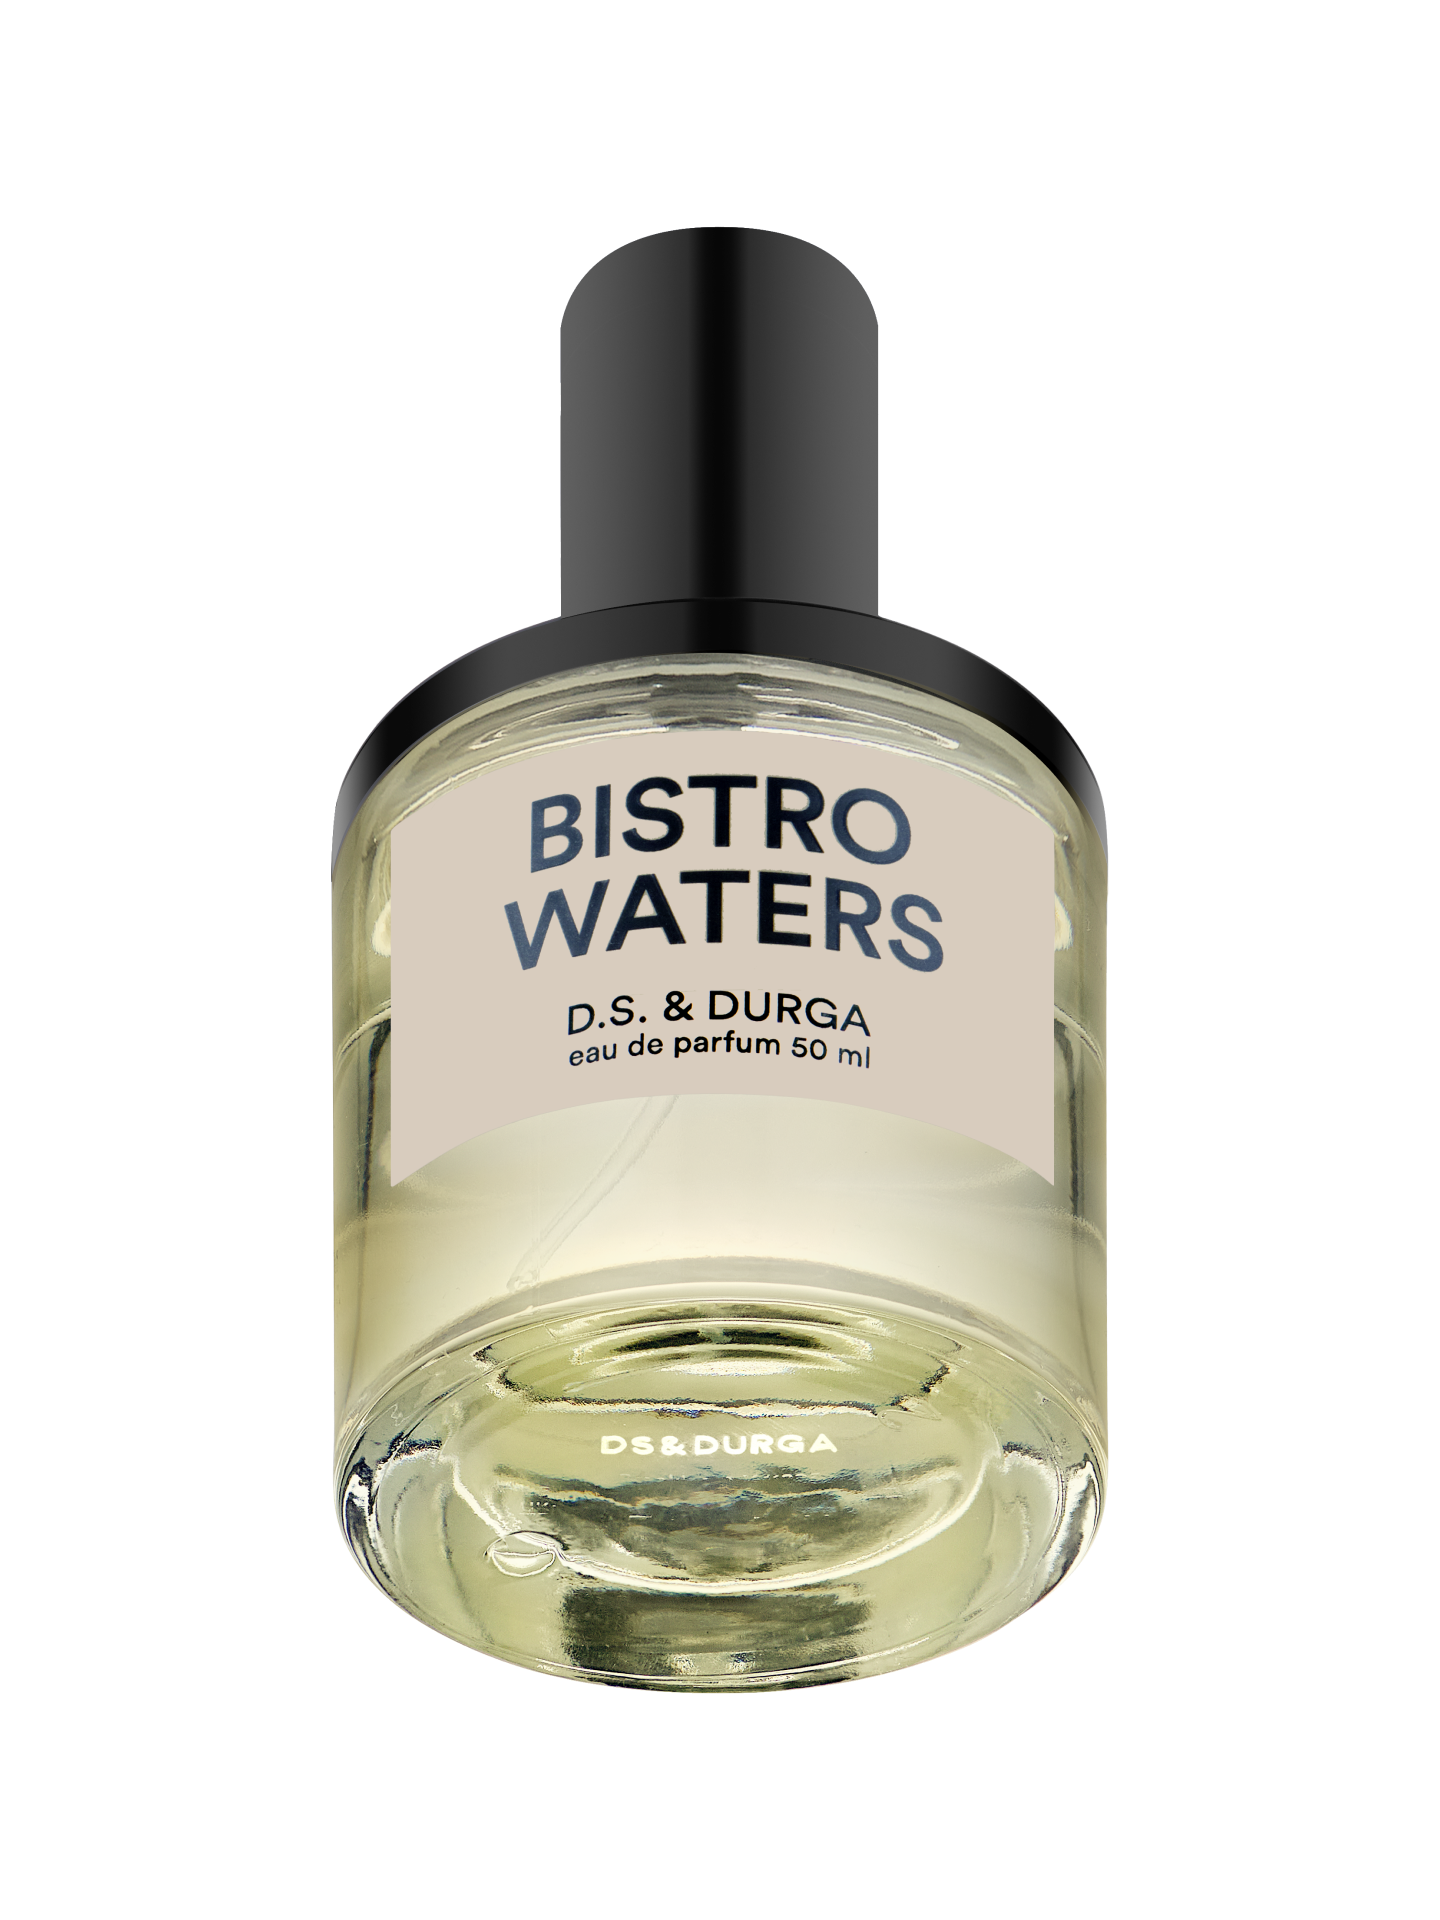 Bistro Waters Fragrance